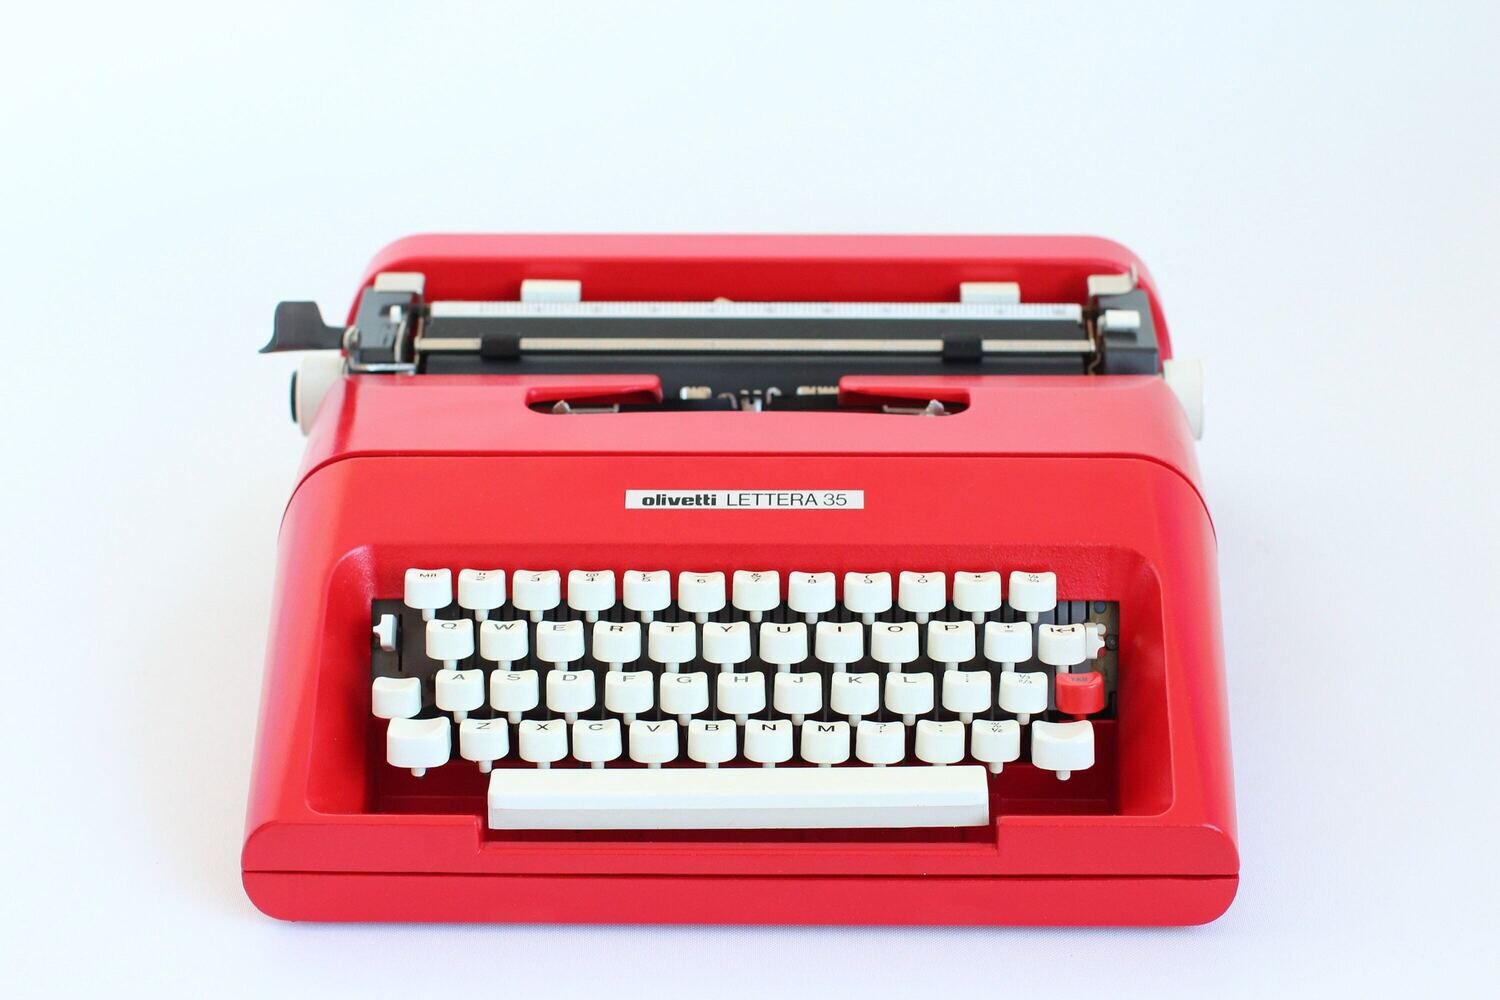 Olivetti Lettera 35 Red Typewriter, Vintage, Manual Portable, Professionally Serviced by Typewriter.Company